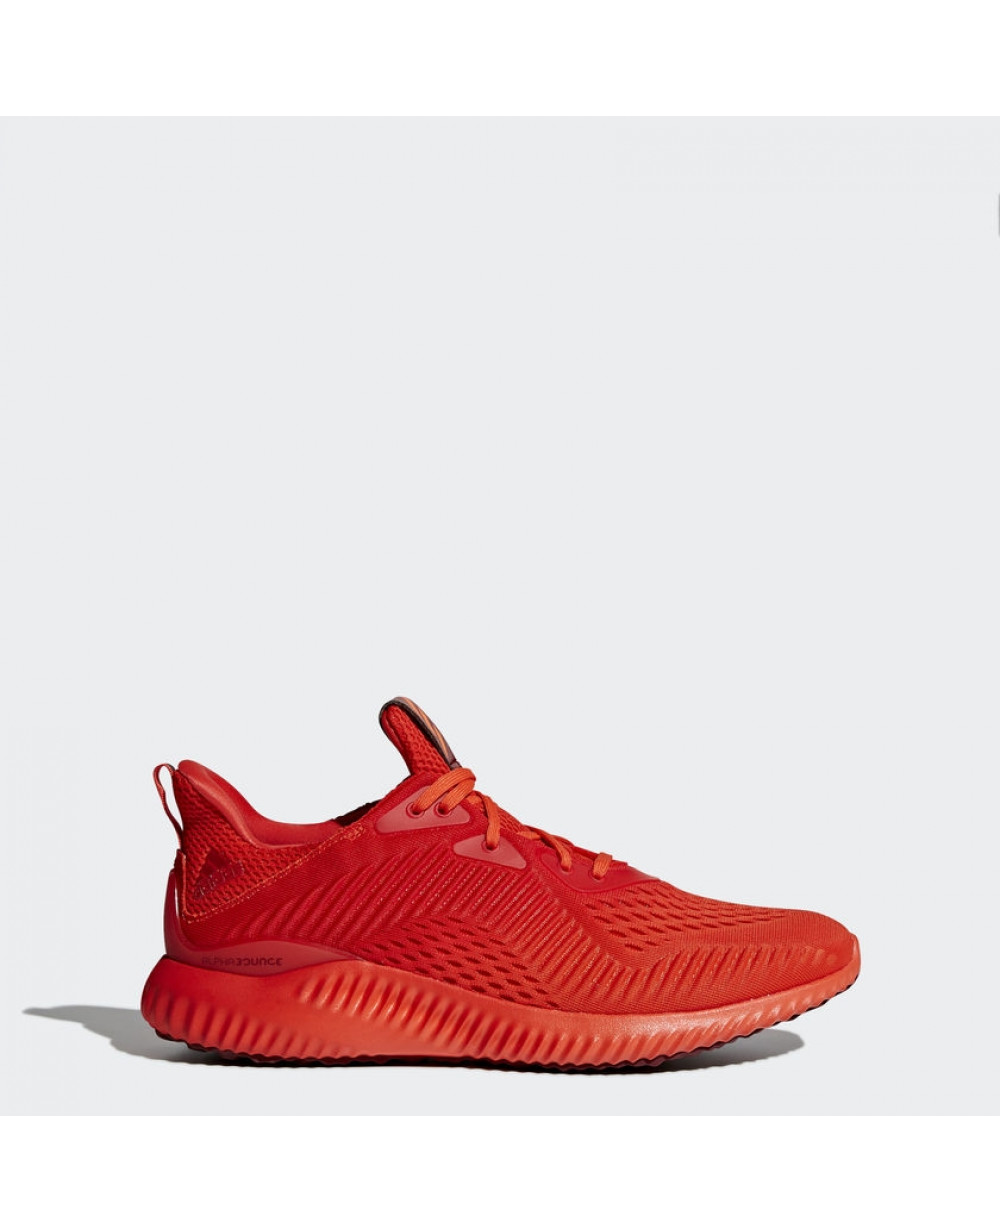 adidas shoes alphabounce price